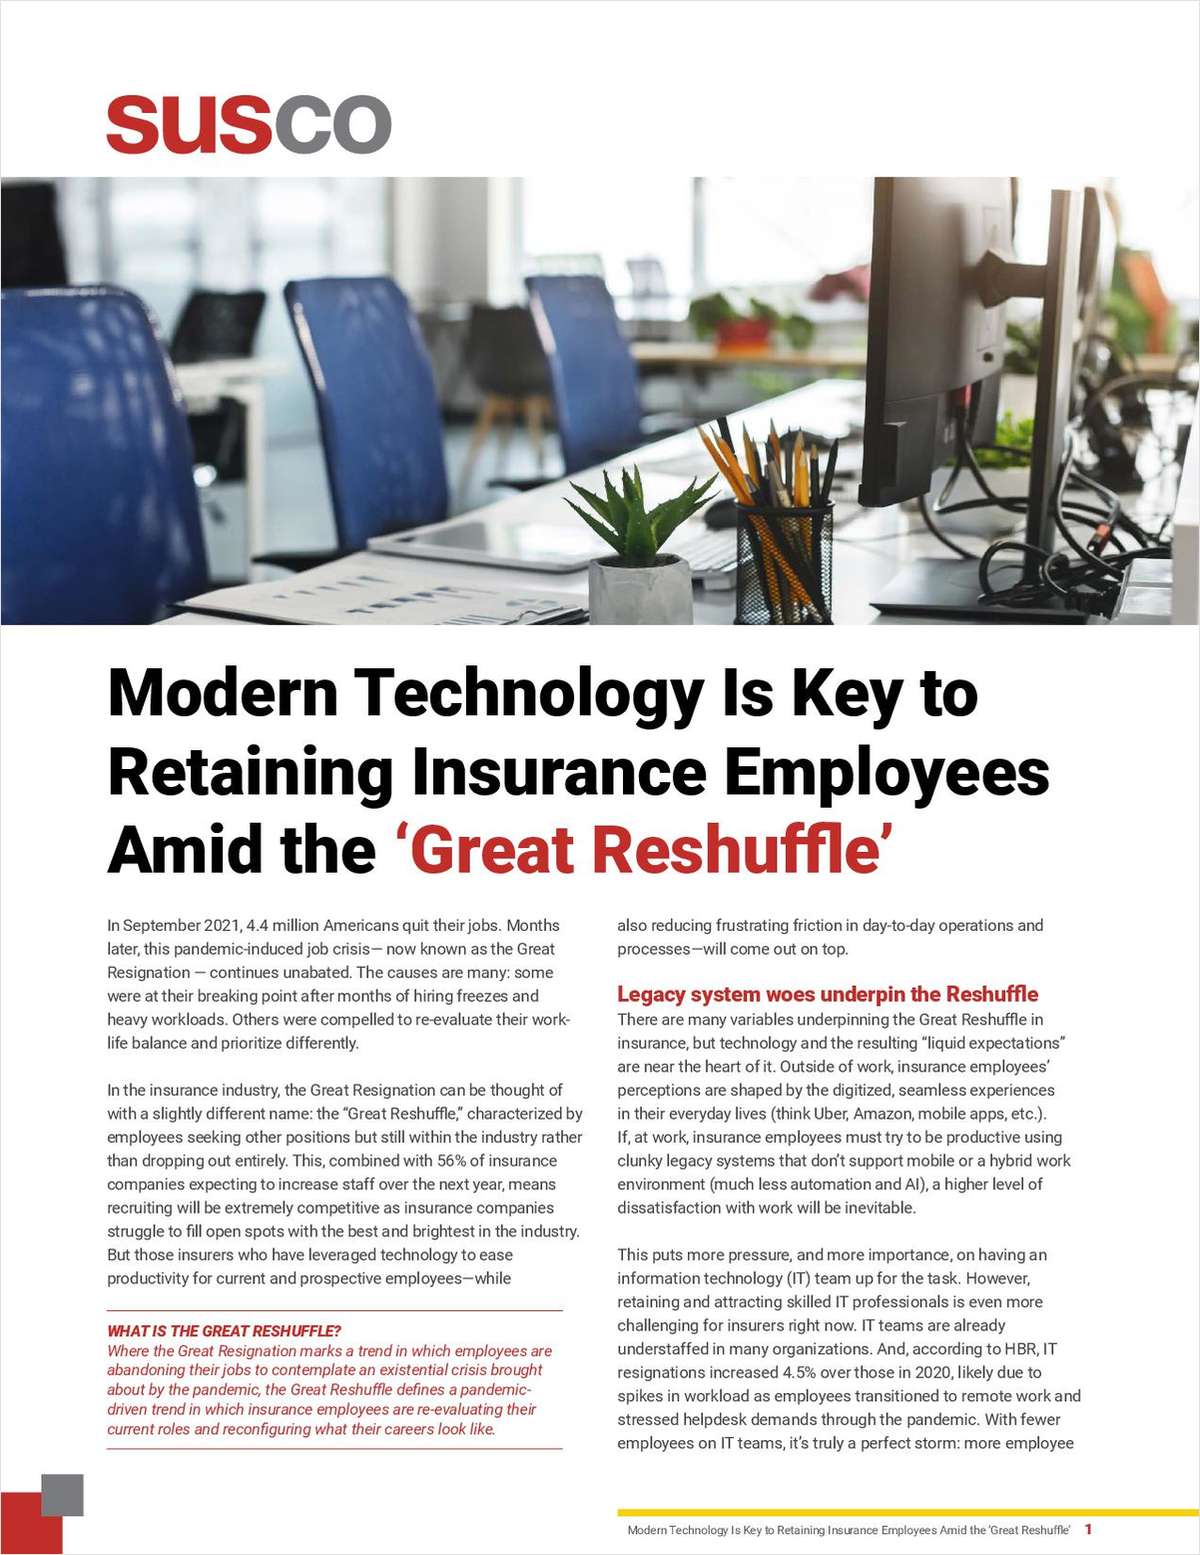 Modern Technology Is Key to Retaining Insurance Employees Amid the 'Great Reshuffle'